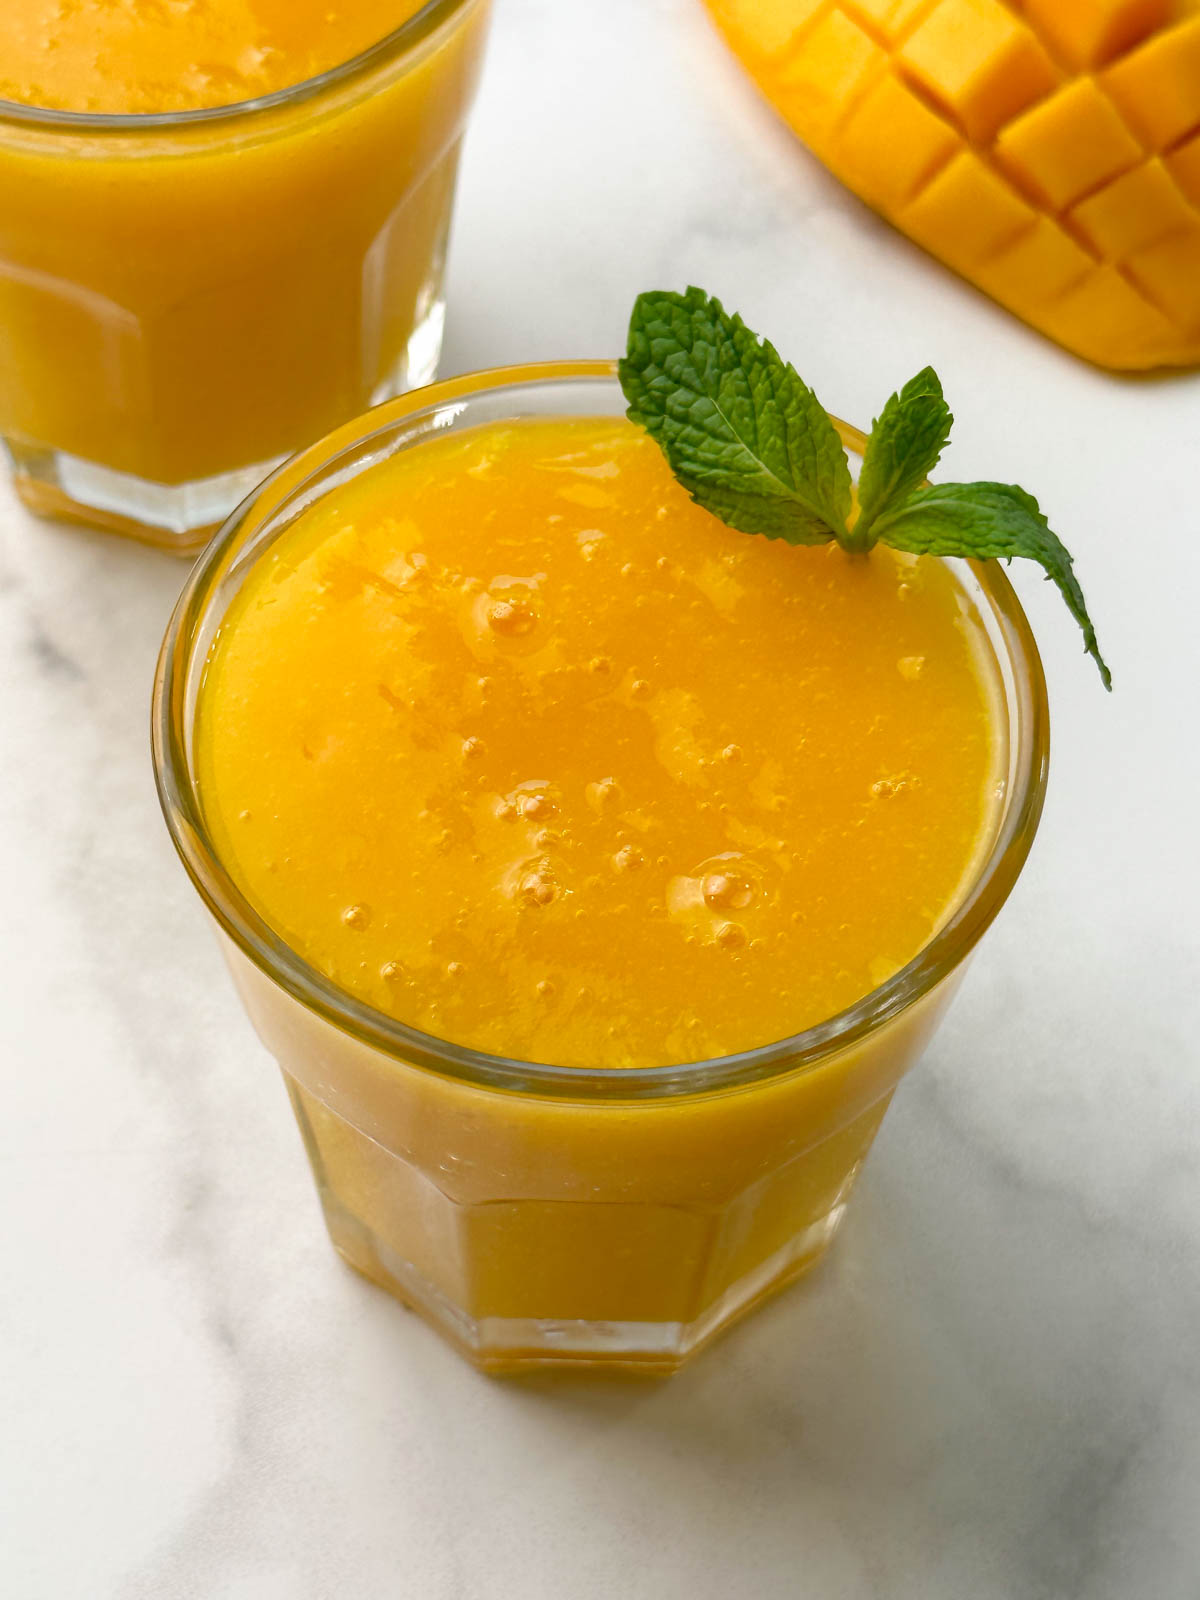 mango juice served in 2 glass containers with mint on the top for garnishing